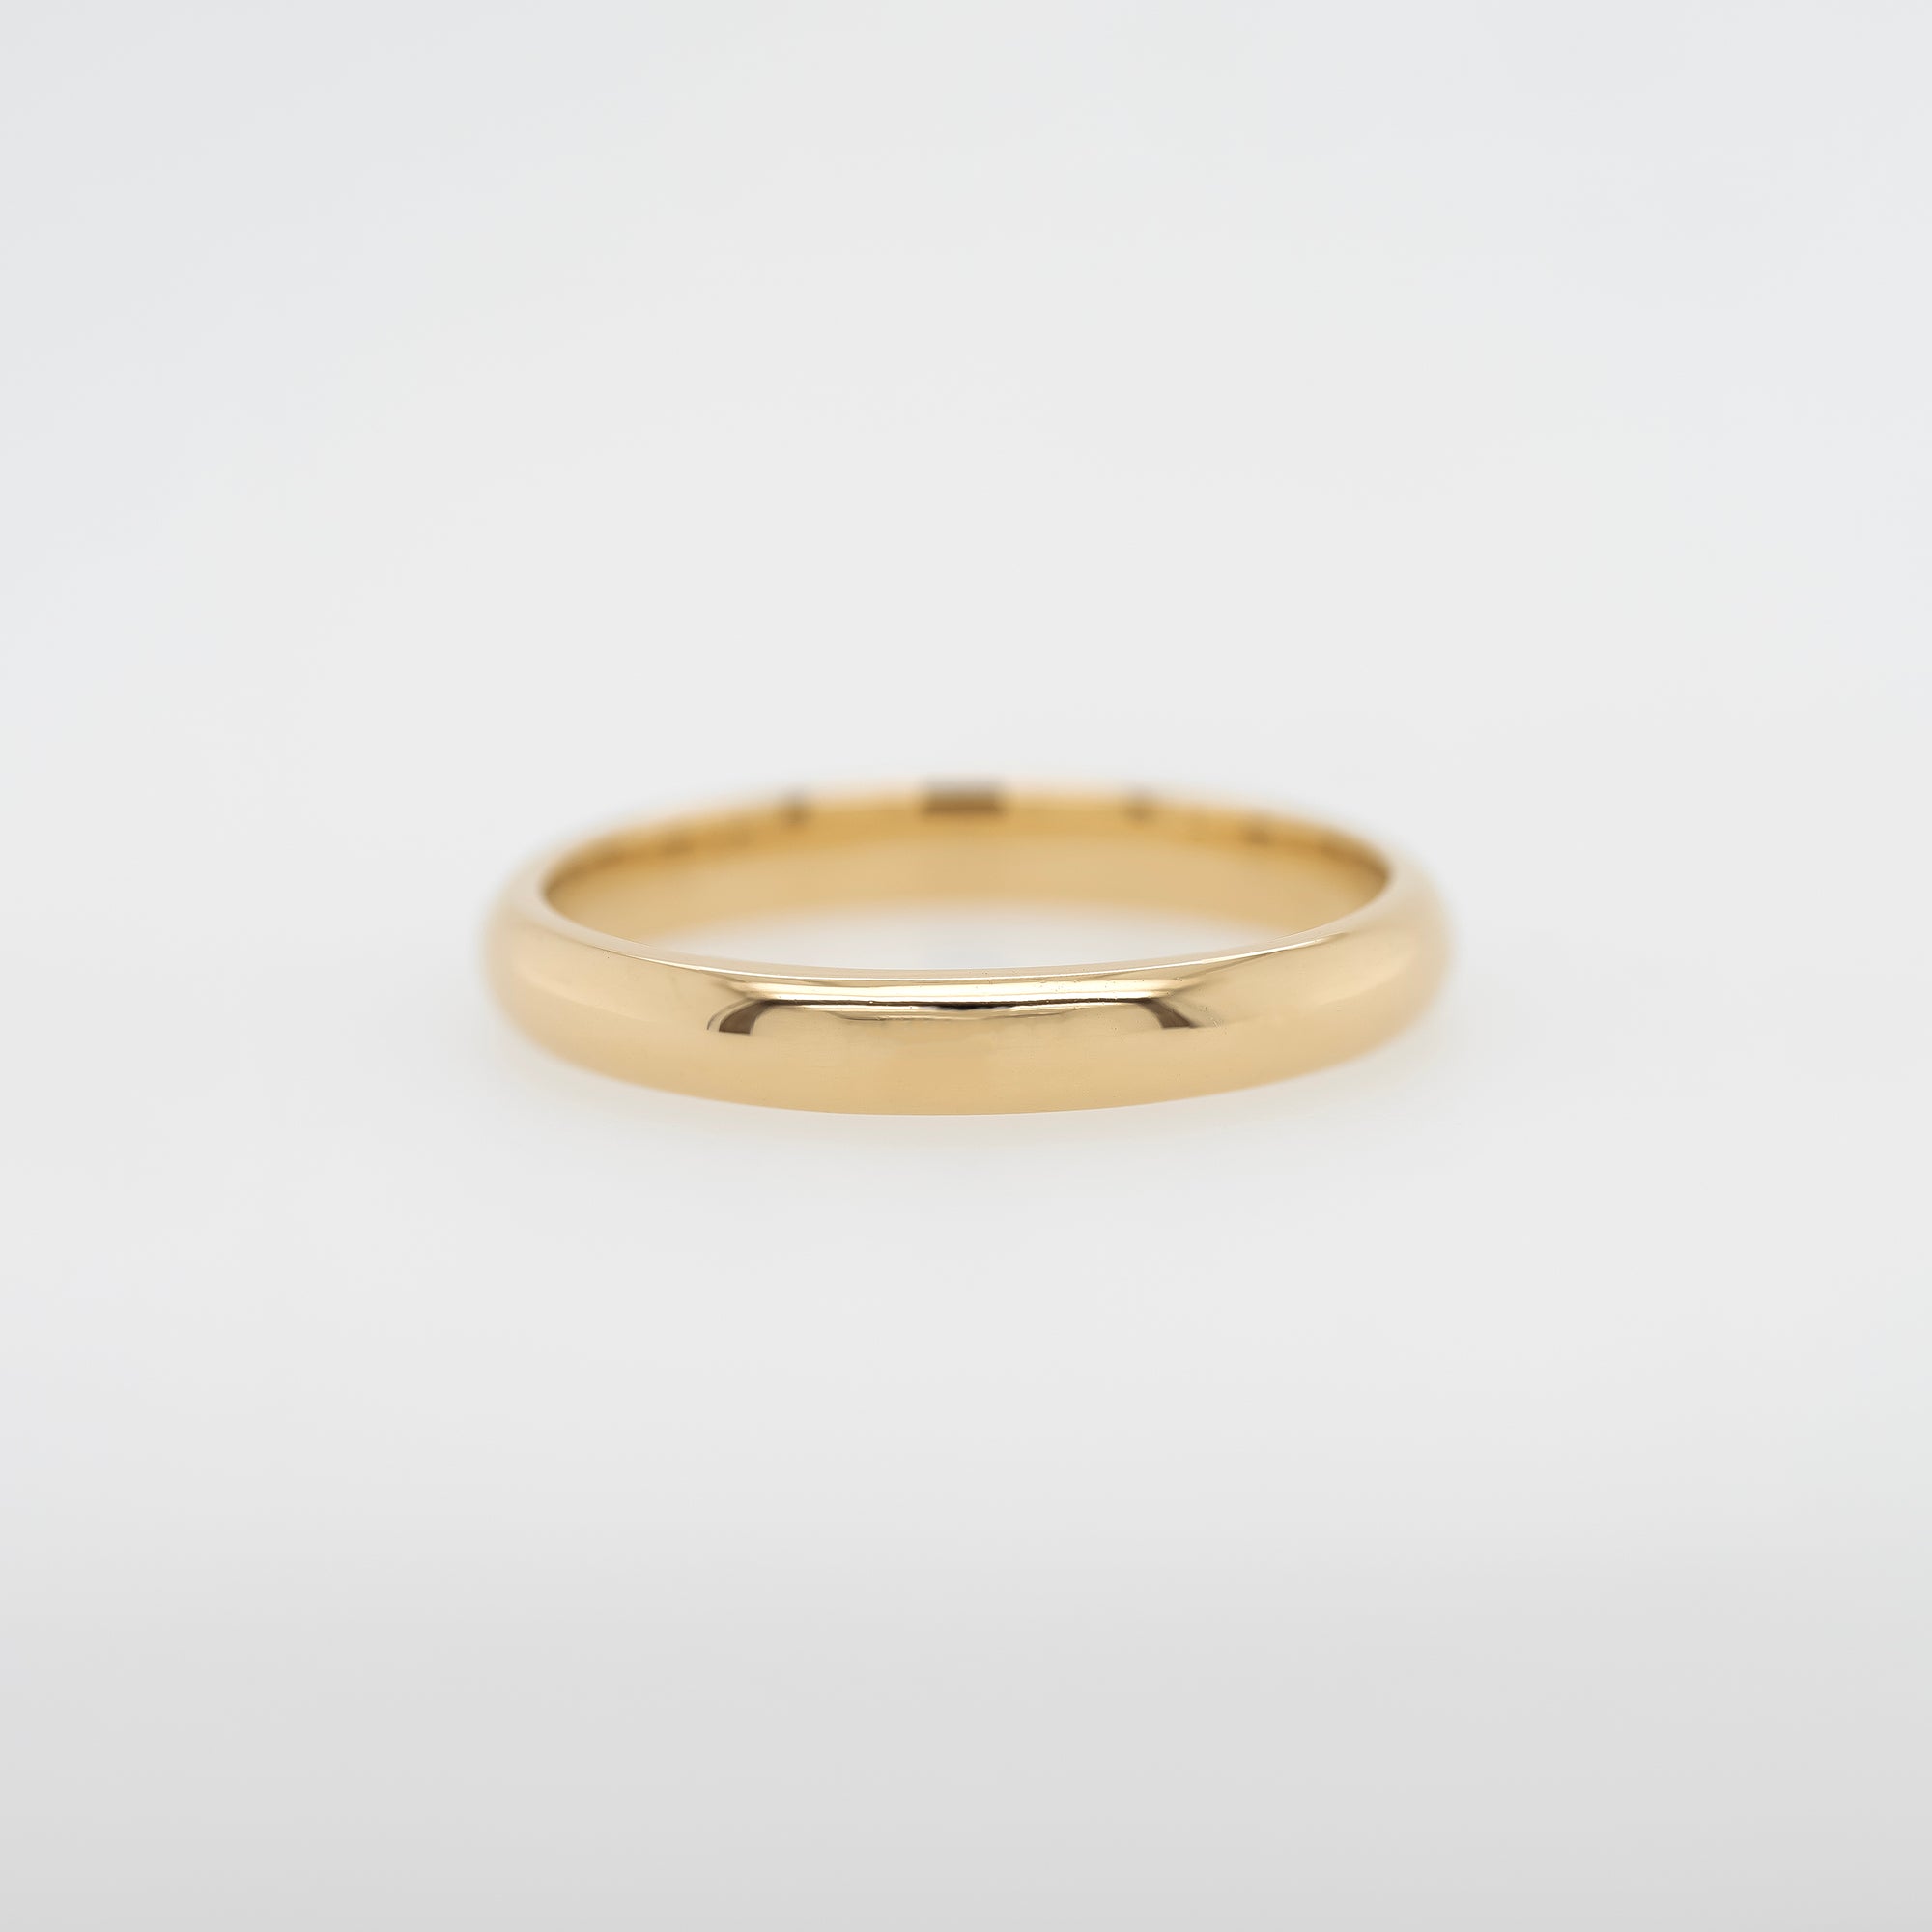 3mm 14ky domed wedding band